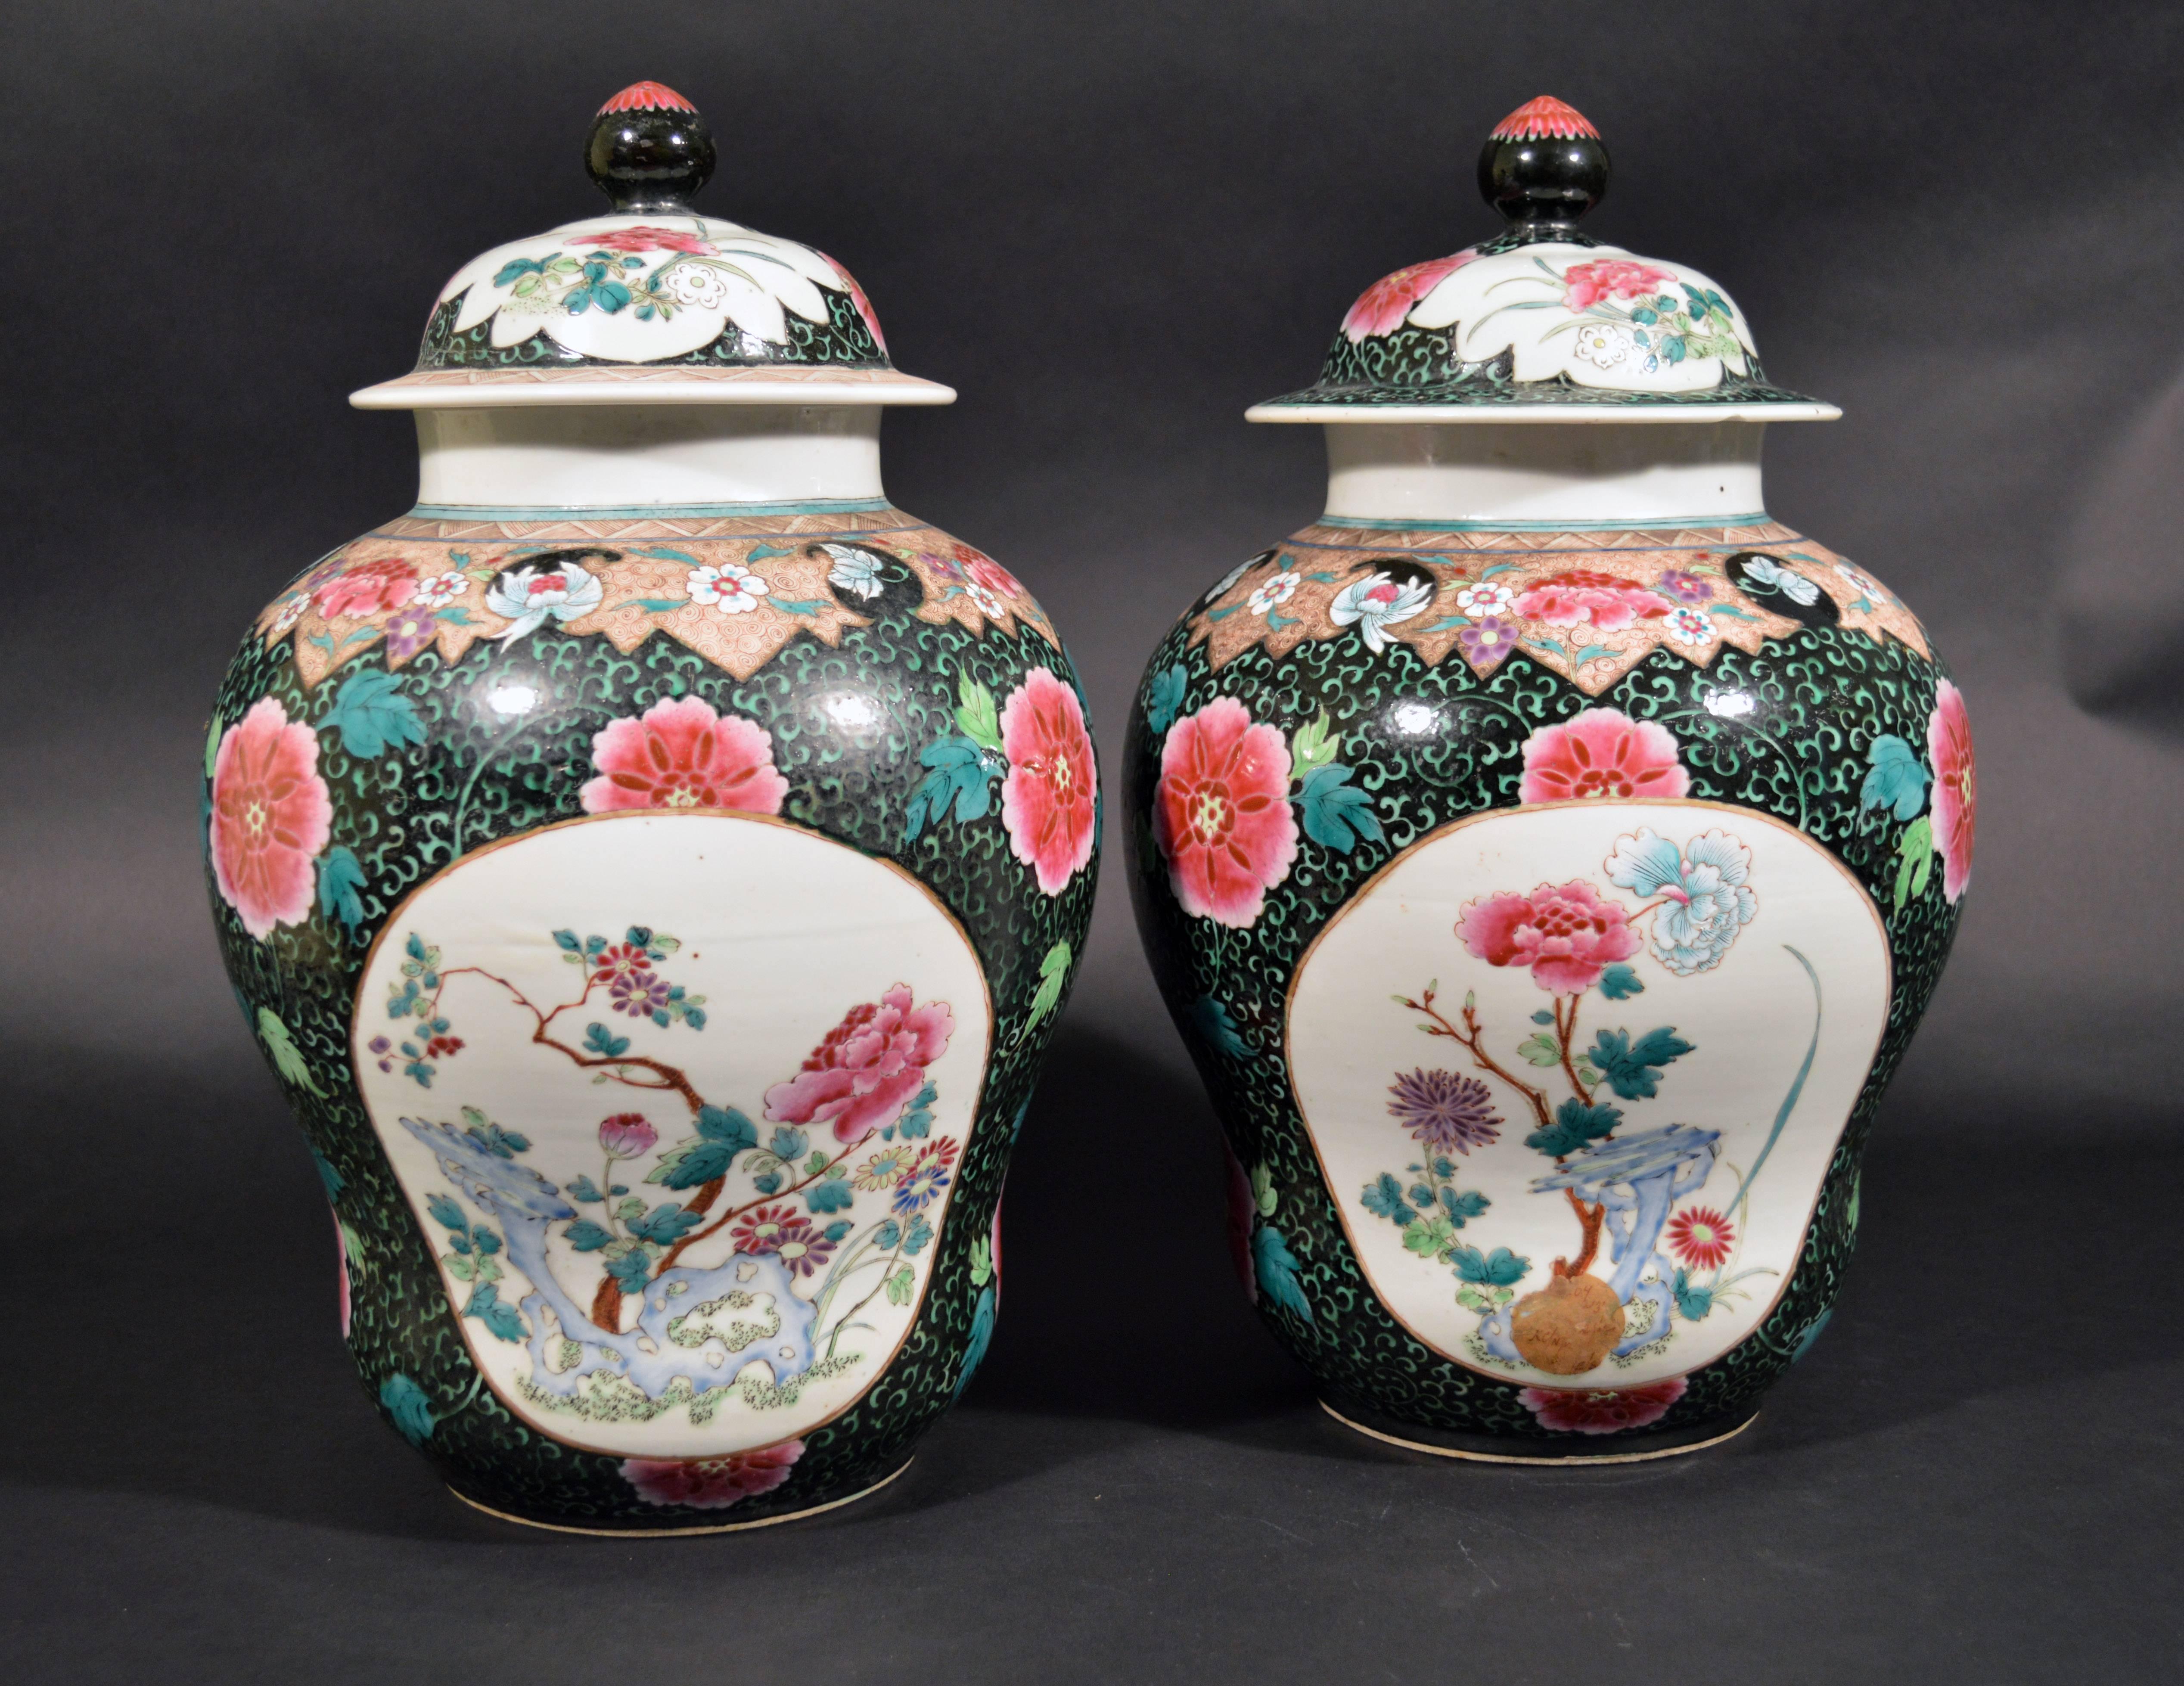 Chinese export porcelain famille rose black-ground large lidded vases each designed with two oval panels decorated with peonies and other flowers on stylized rockwork in blue.

The bodies of the gourd-shaped vases with a noir-ground randomly